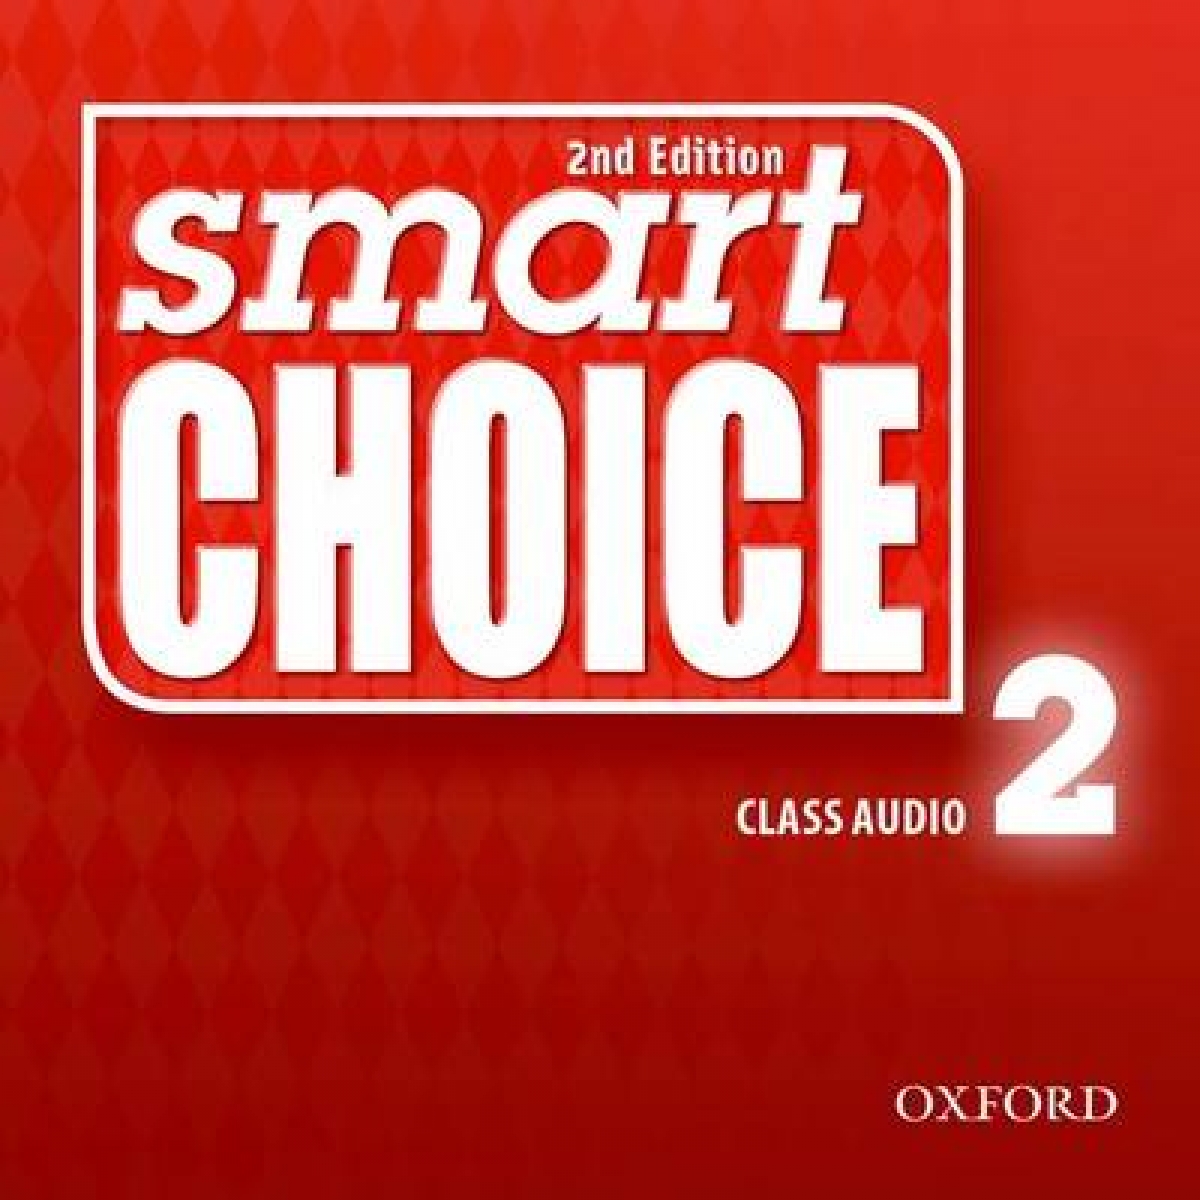 Smart choice 2 - Second Edition